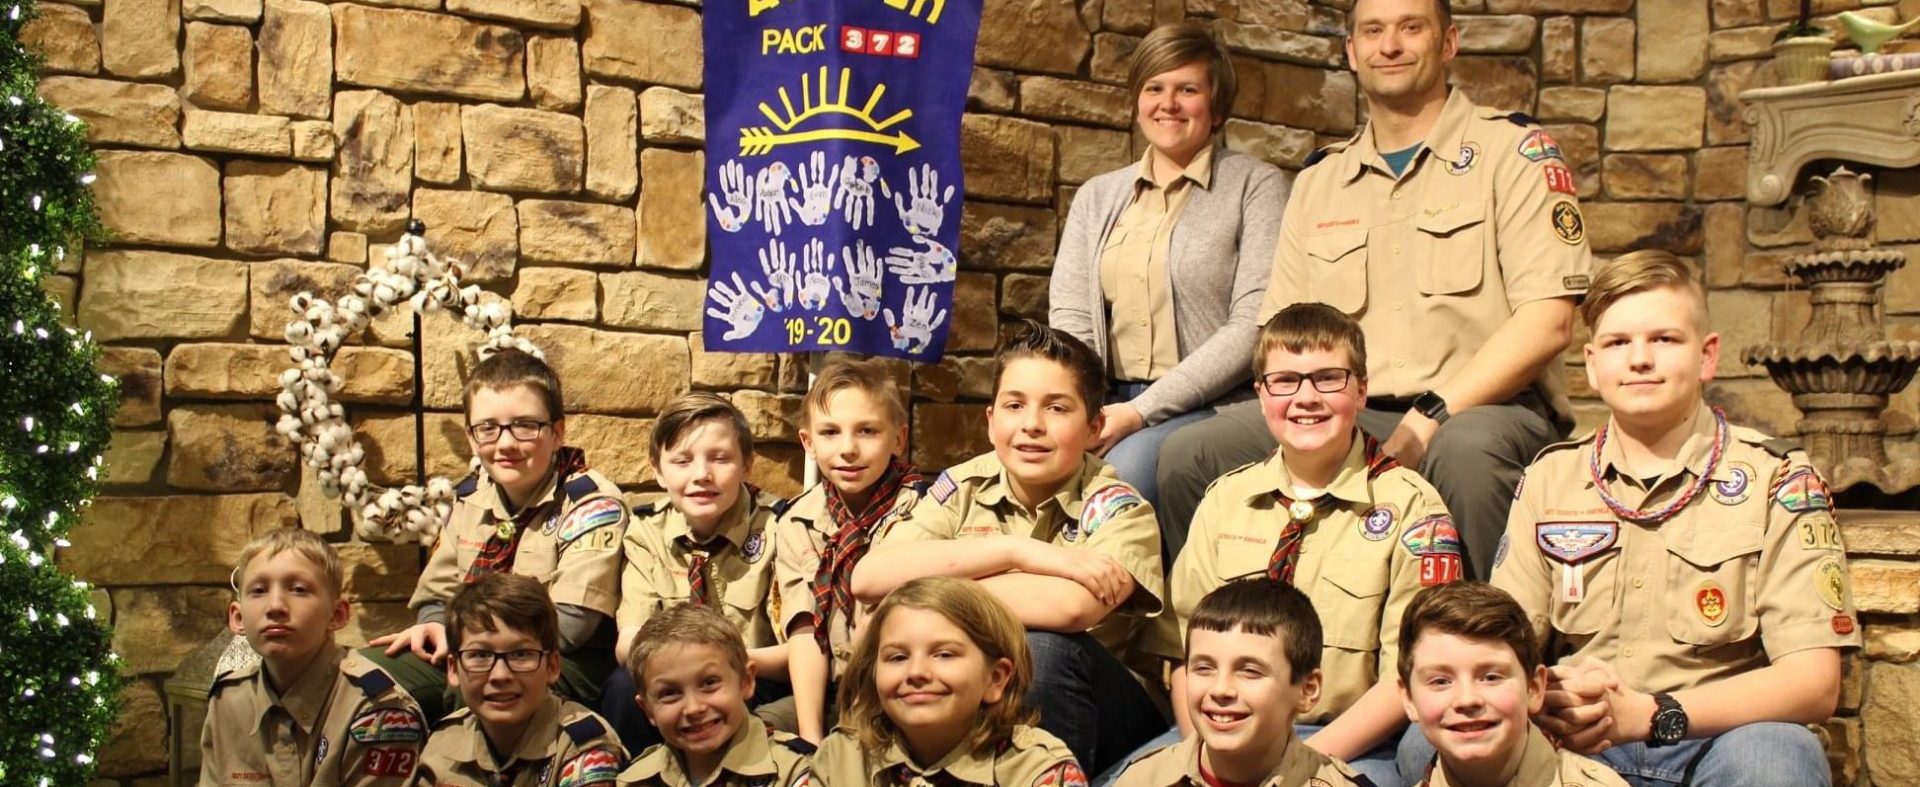 River Trails Information | Greater St. Louis Area Scouting